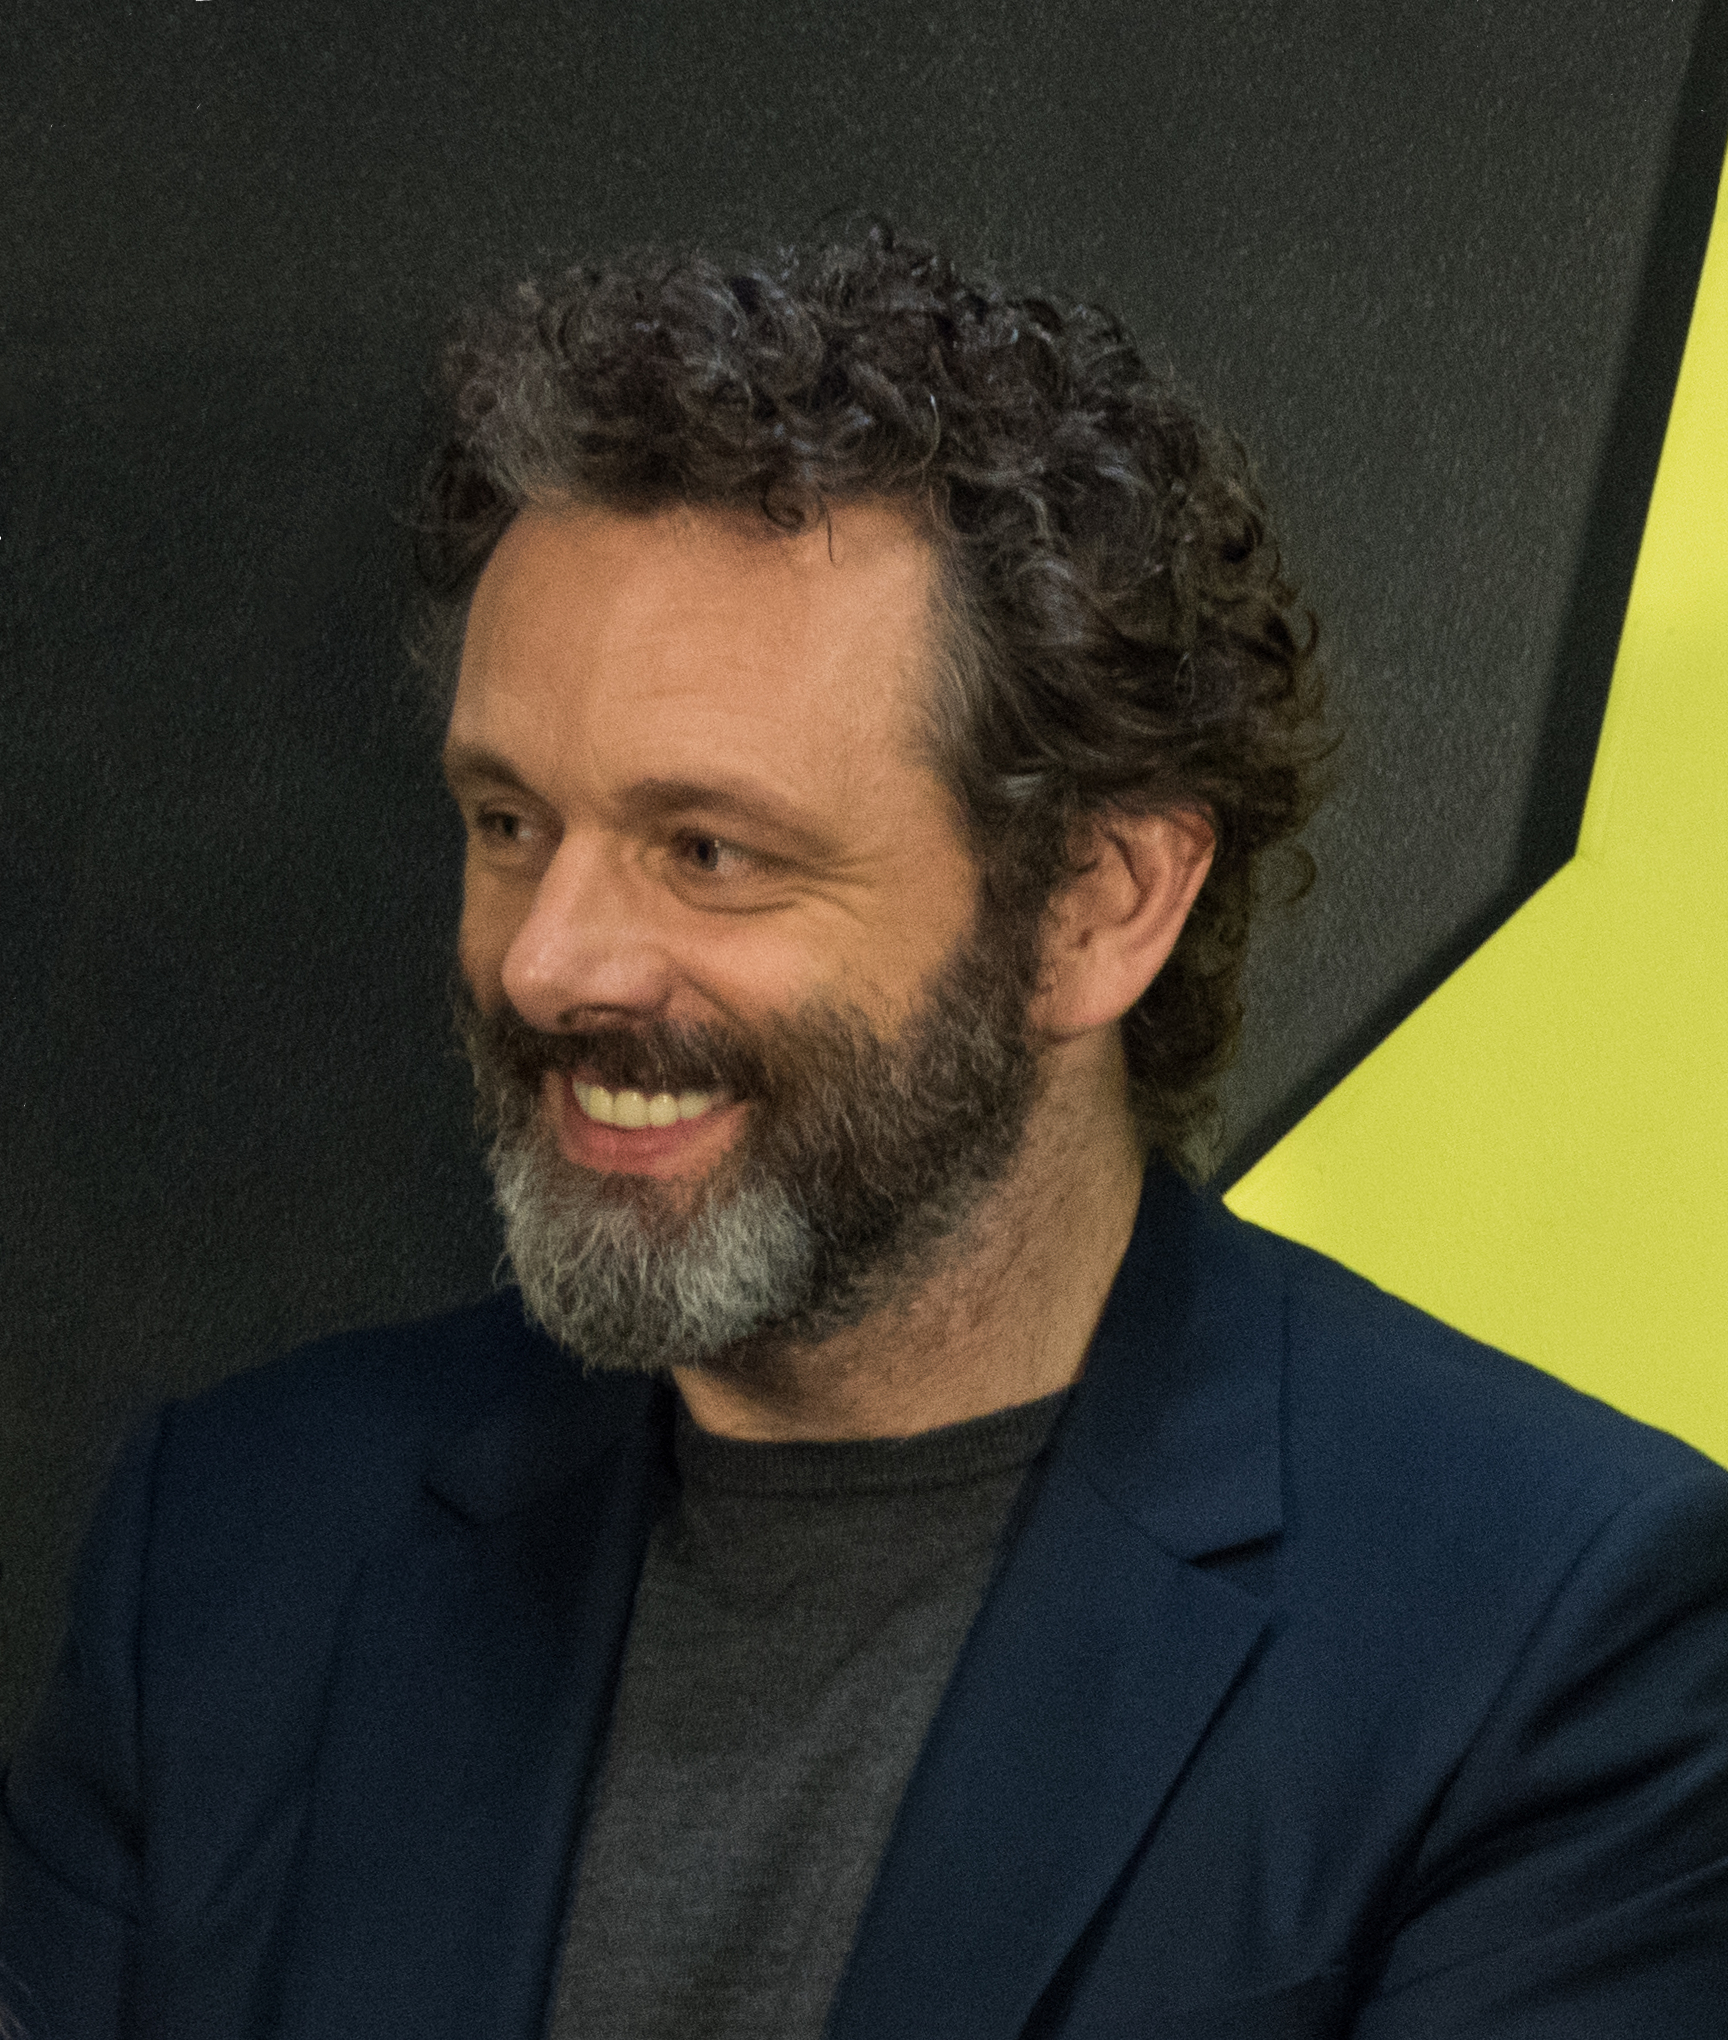 Michael Sheen - A Versatile And Accomplished Actor